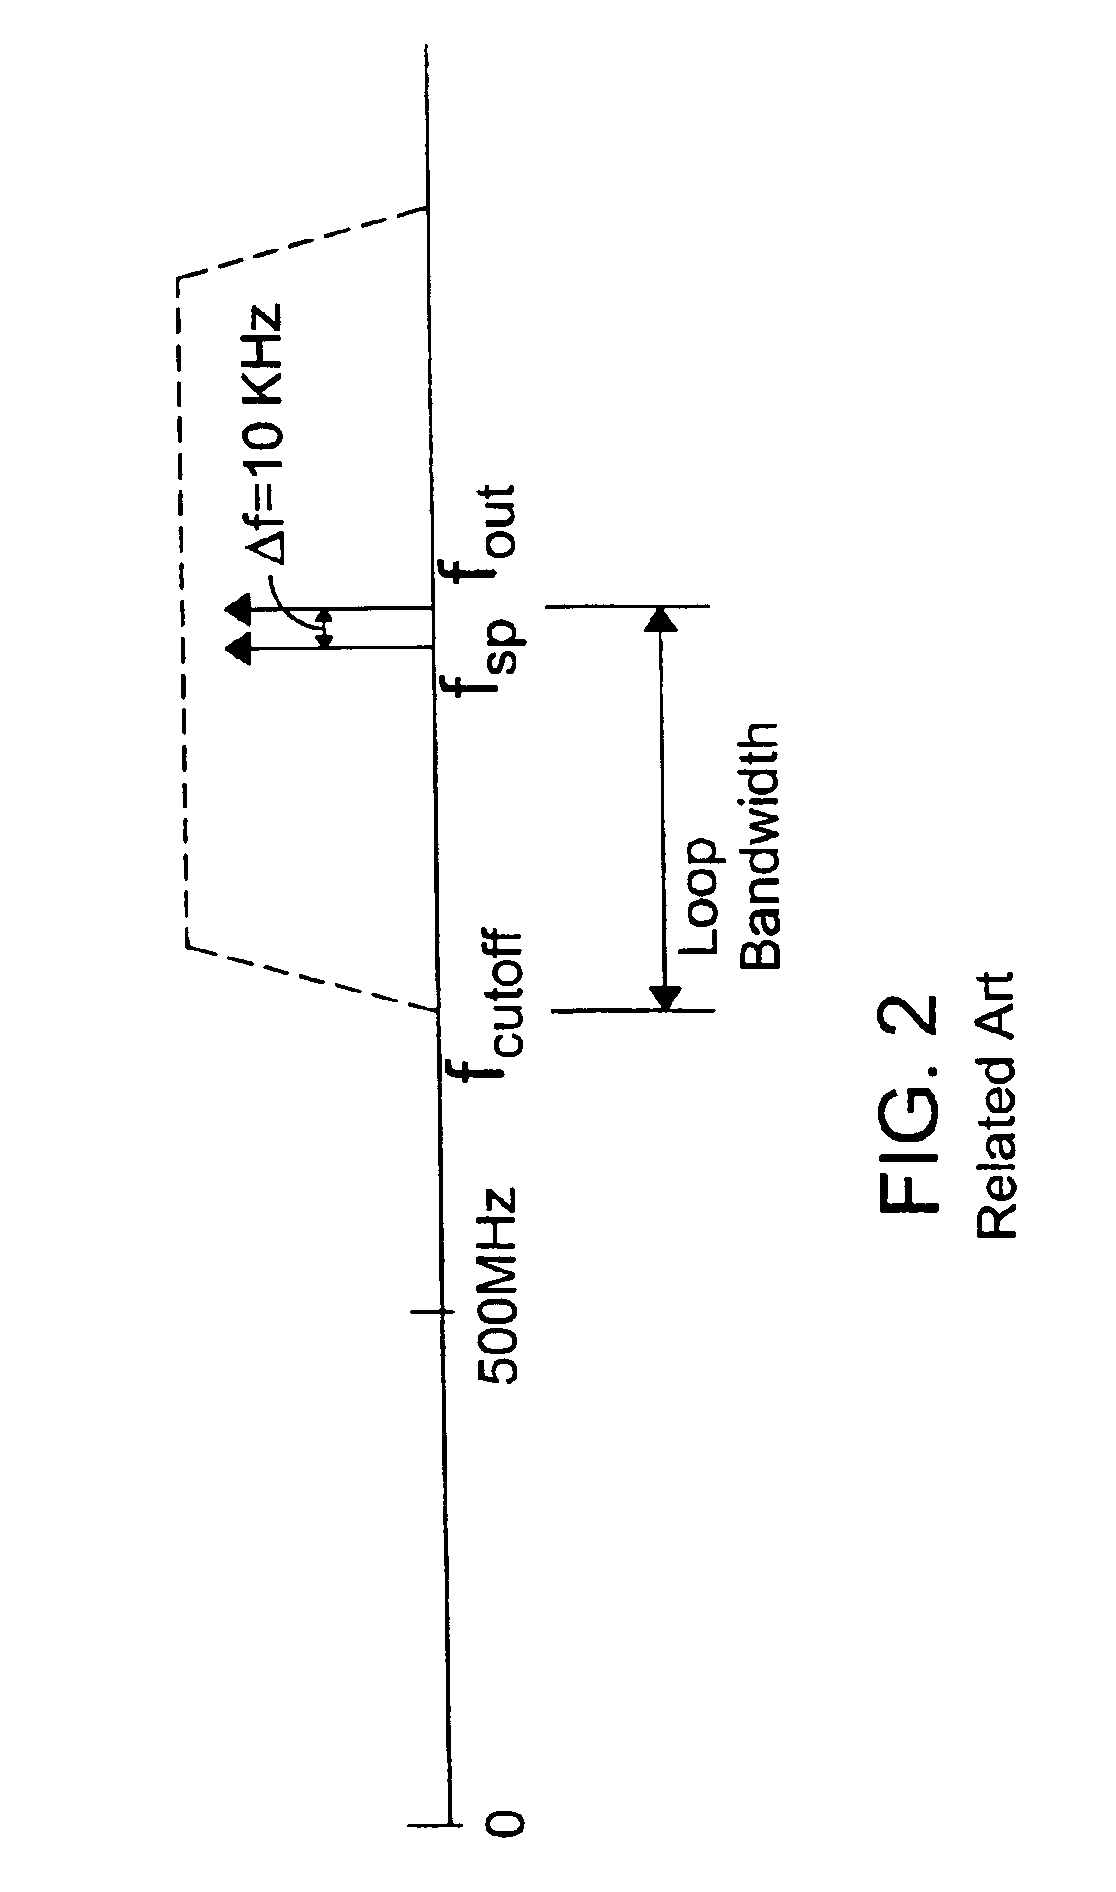 System and method for suppressing noise in a phase-locked loop circuit